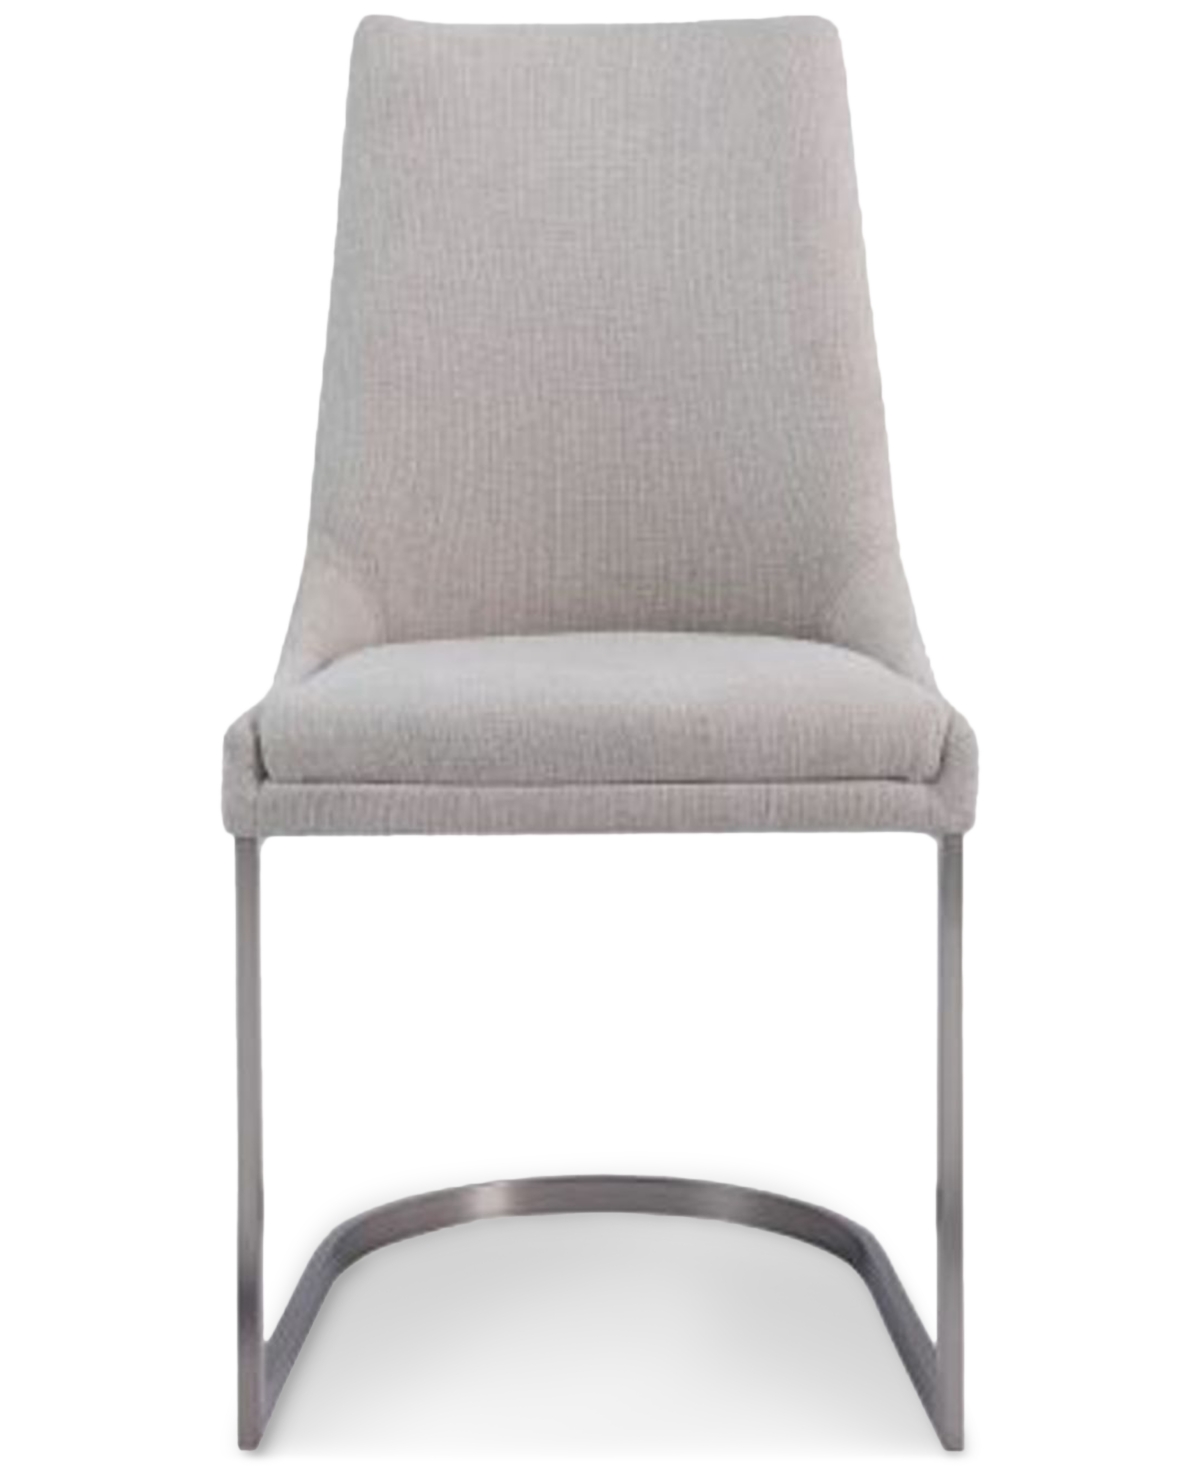 Macy's Tivie Dining Chair 4pc Set In Stone